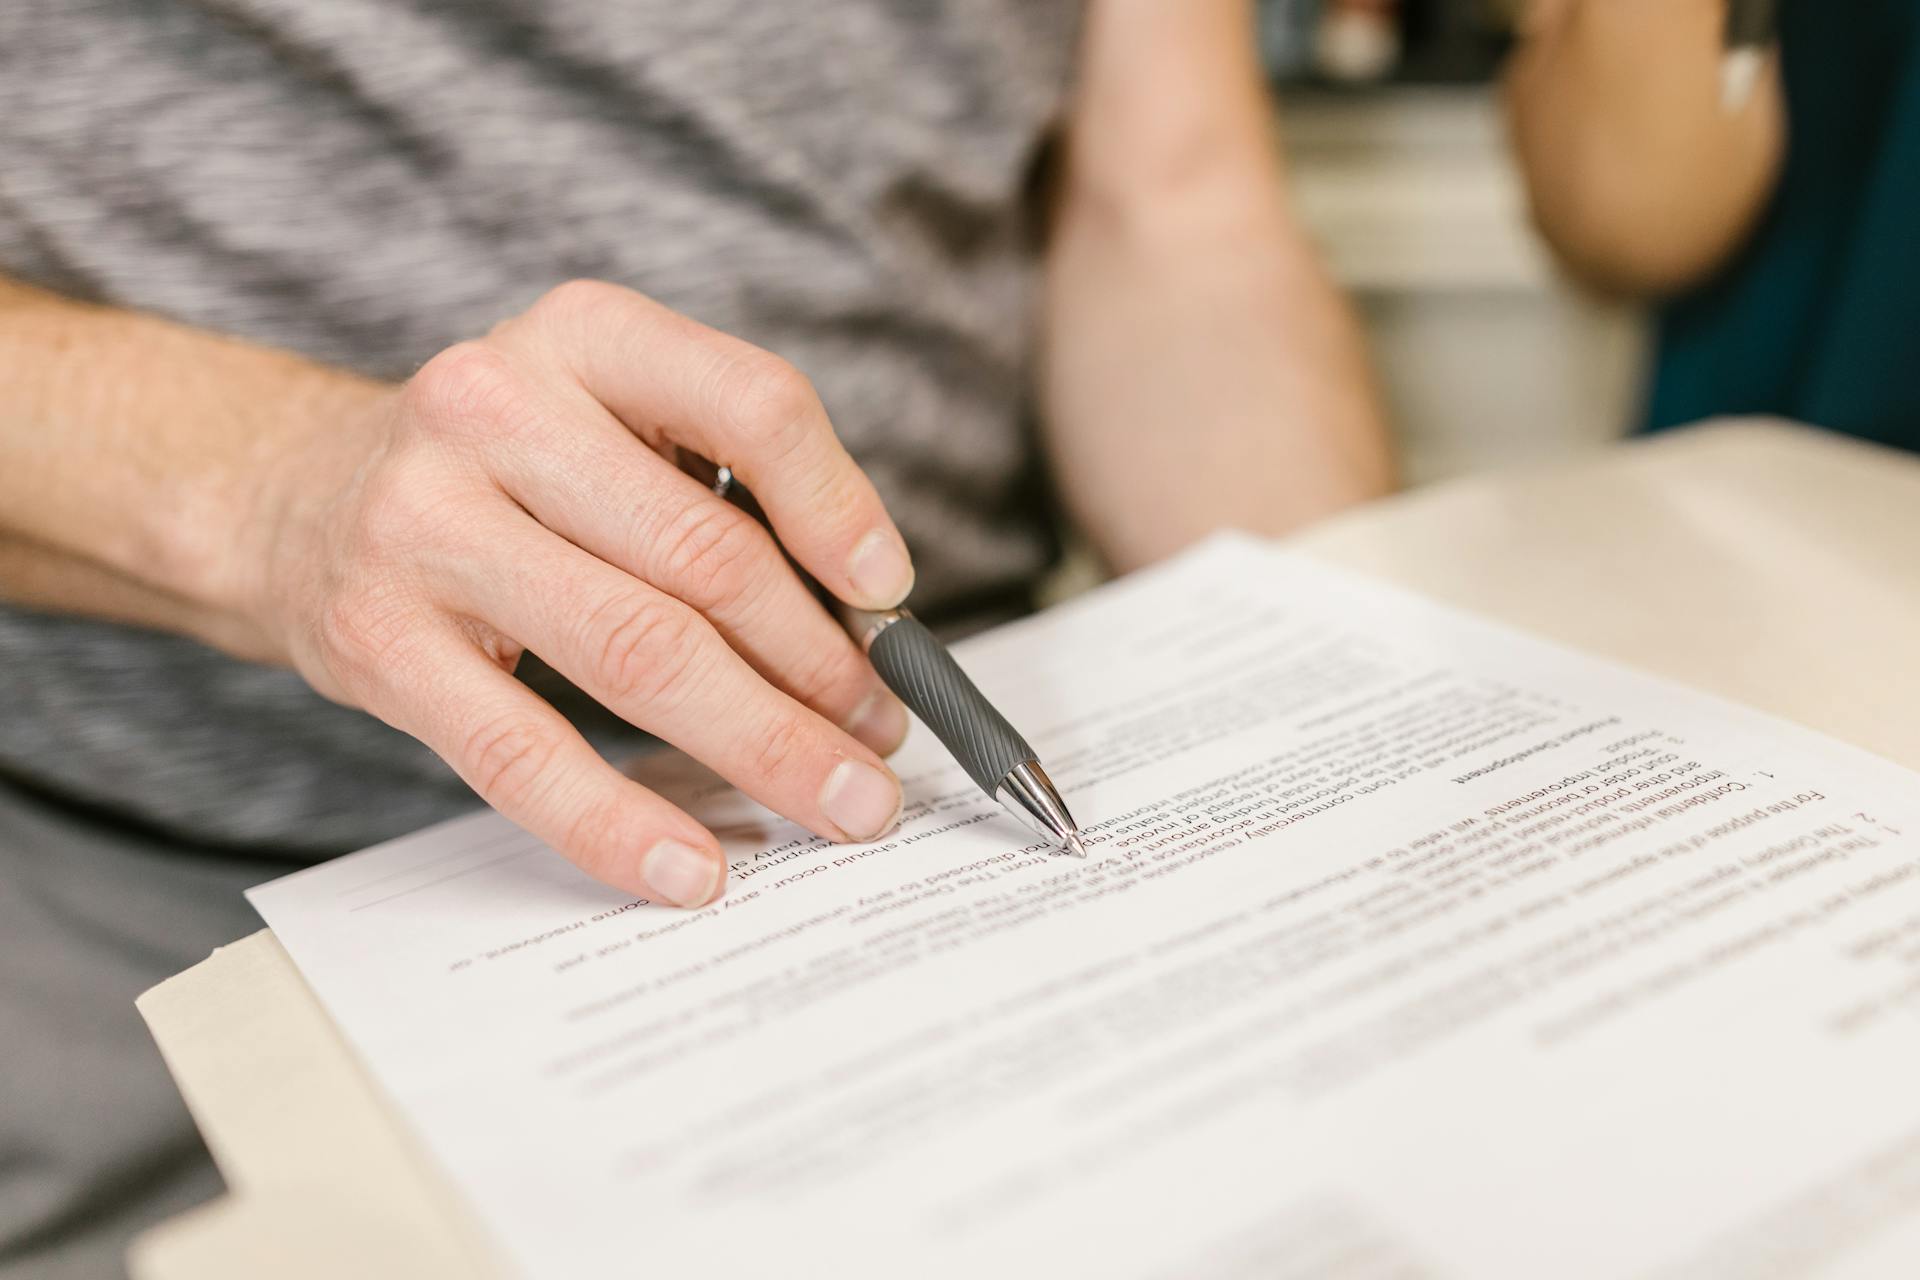 A person reading a legal document | Source: Pexels